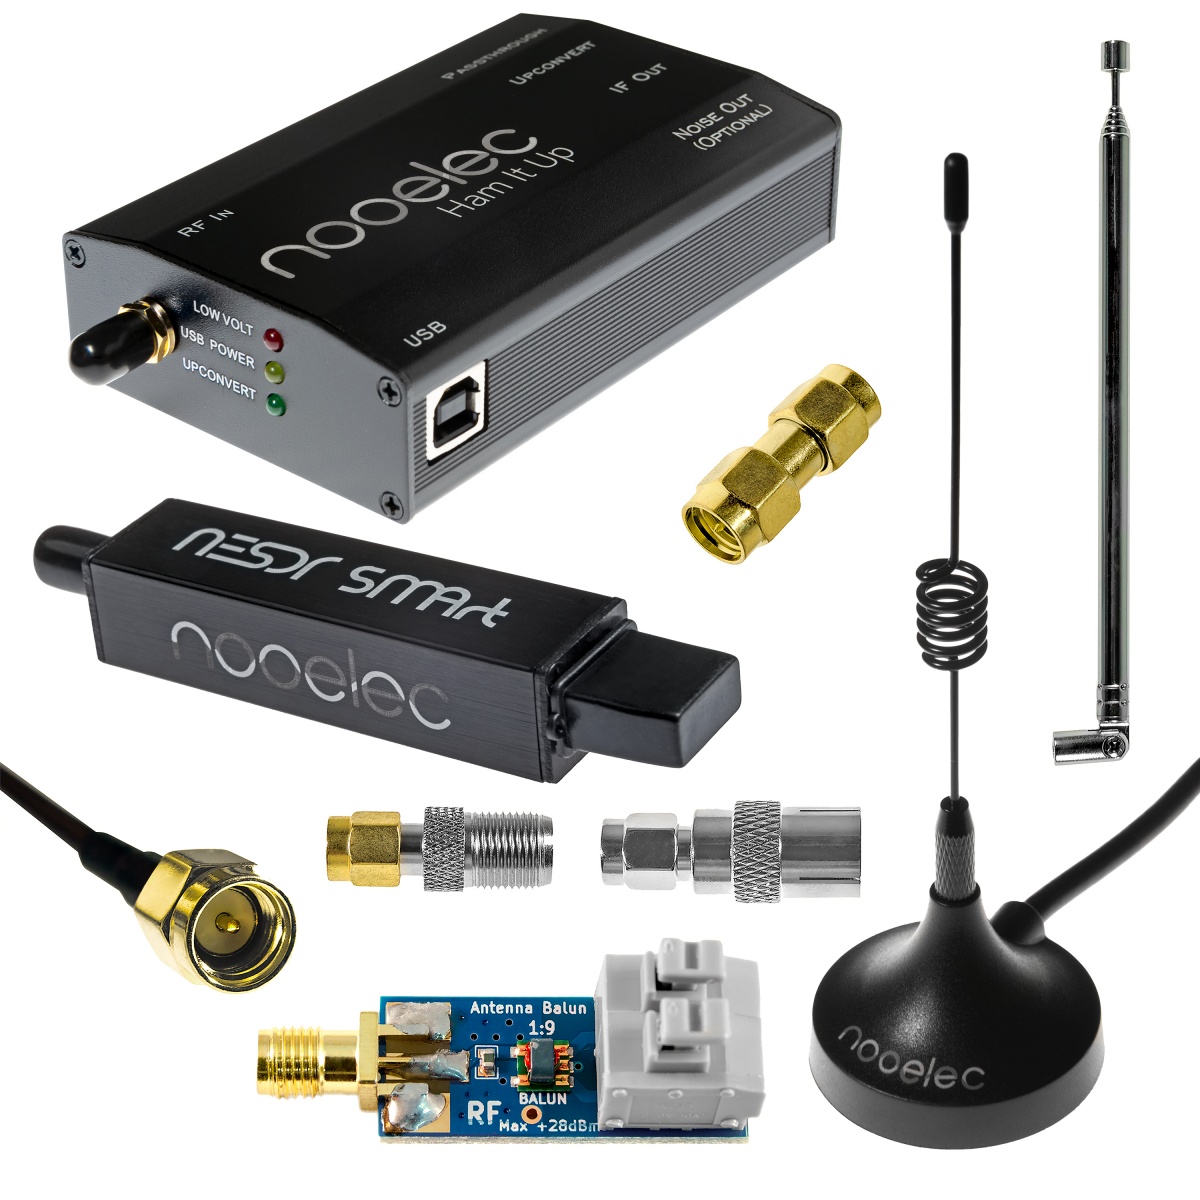 Getting Started With SDR (software defined radio): Tutorial